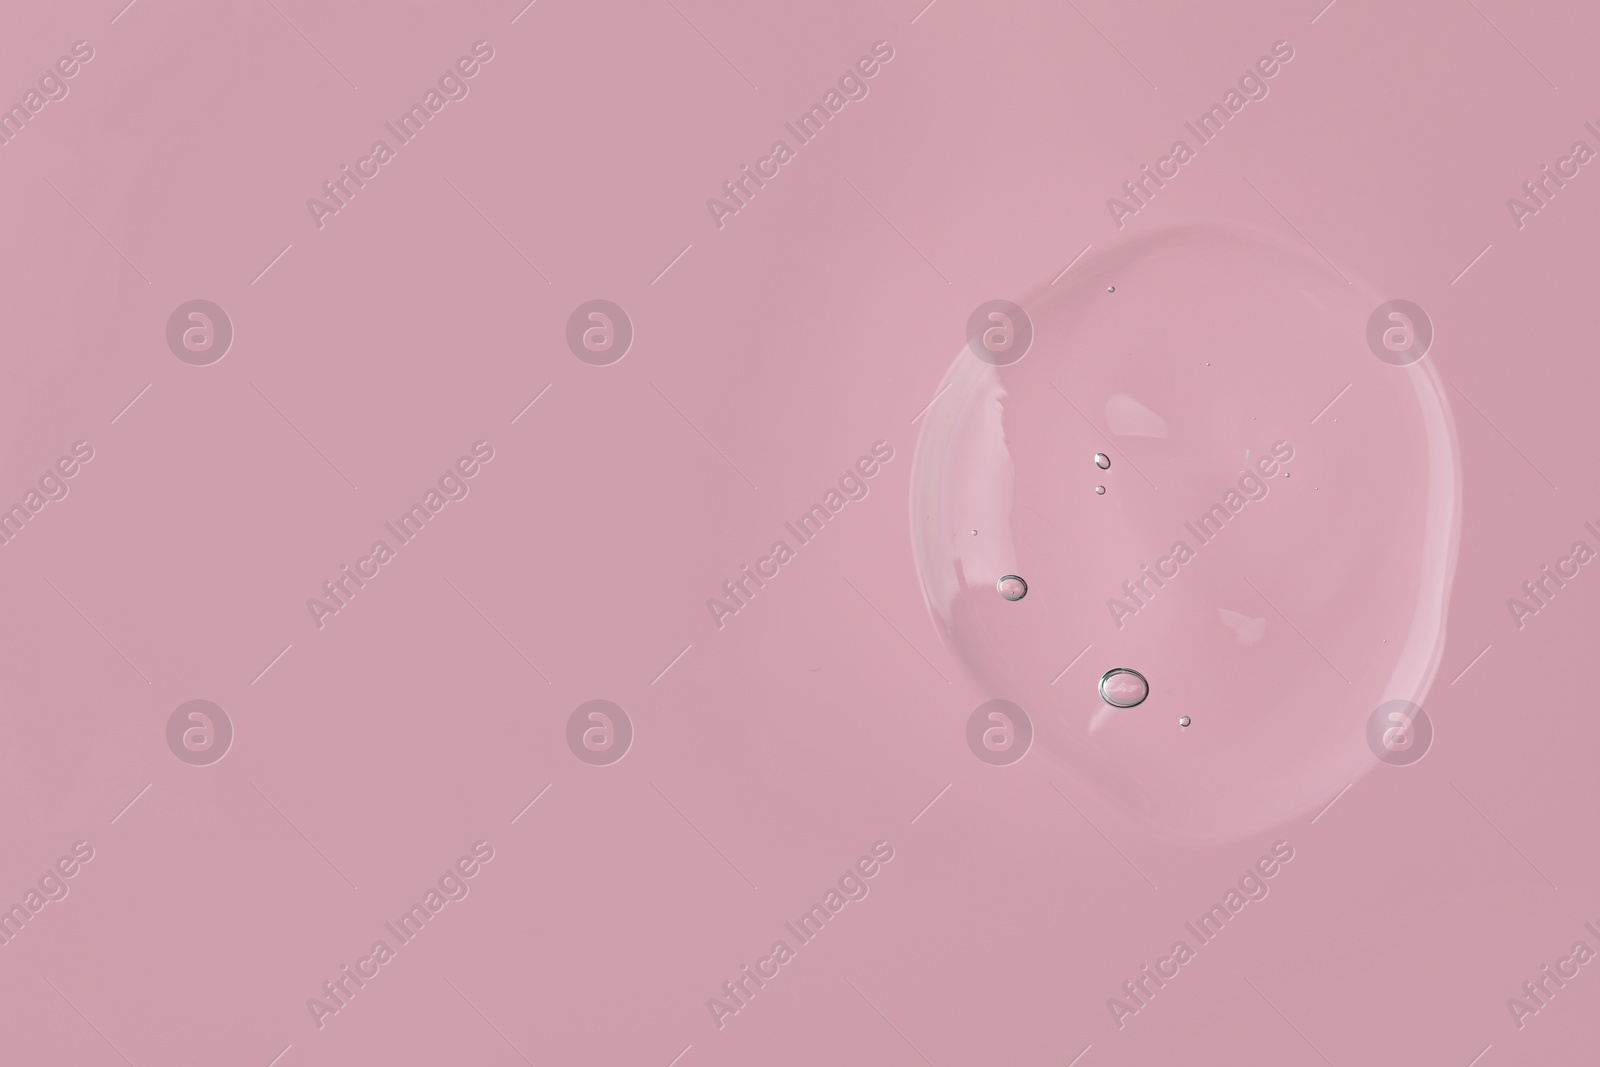 Photo of Sample of cleansing gel on pink background, top view with space for text. Cosmetic product